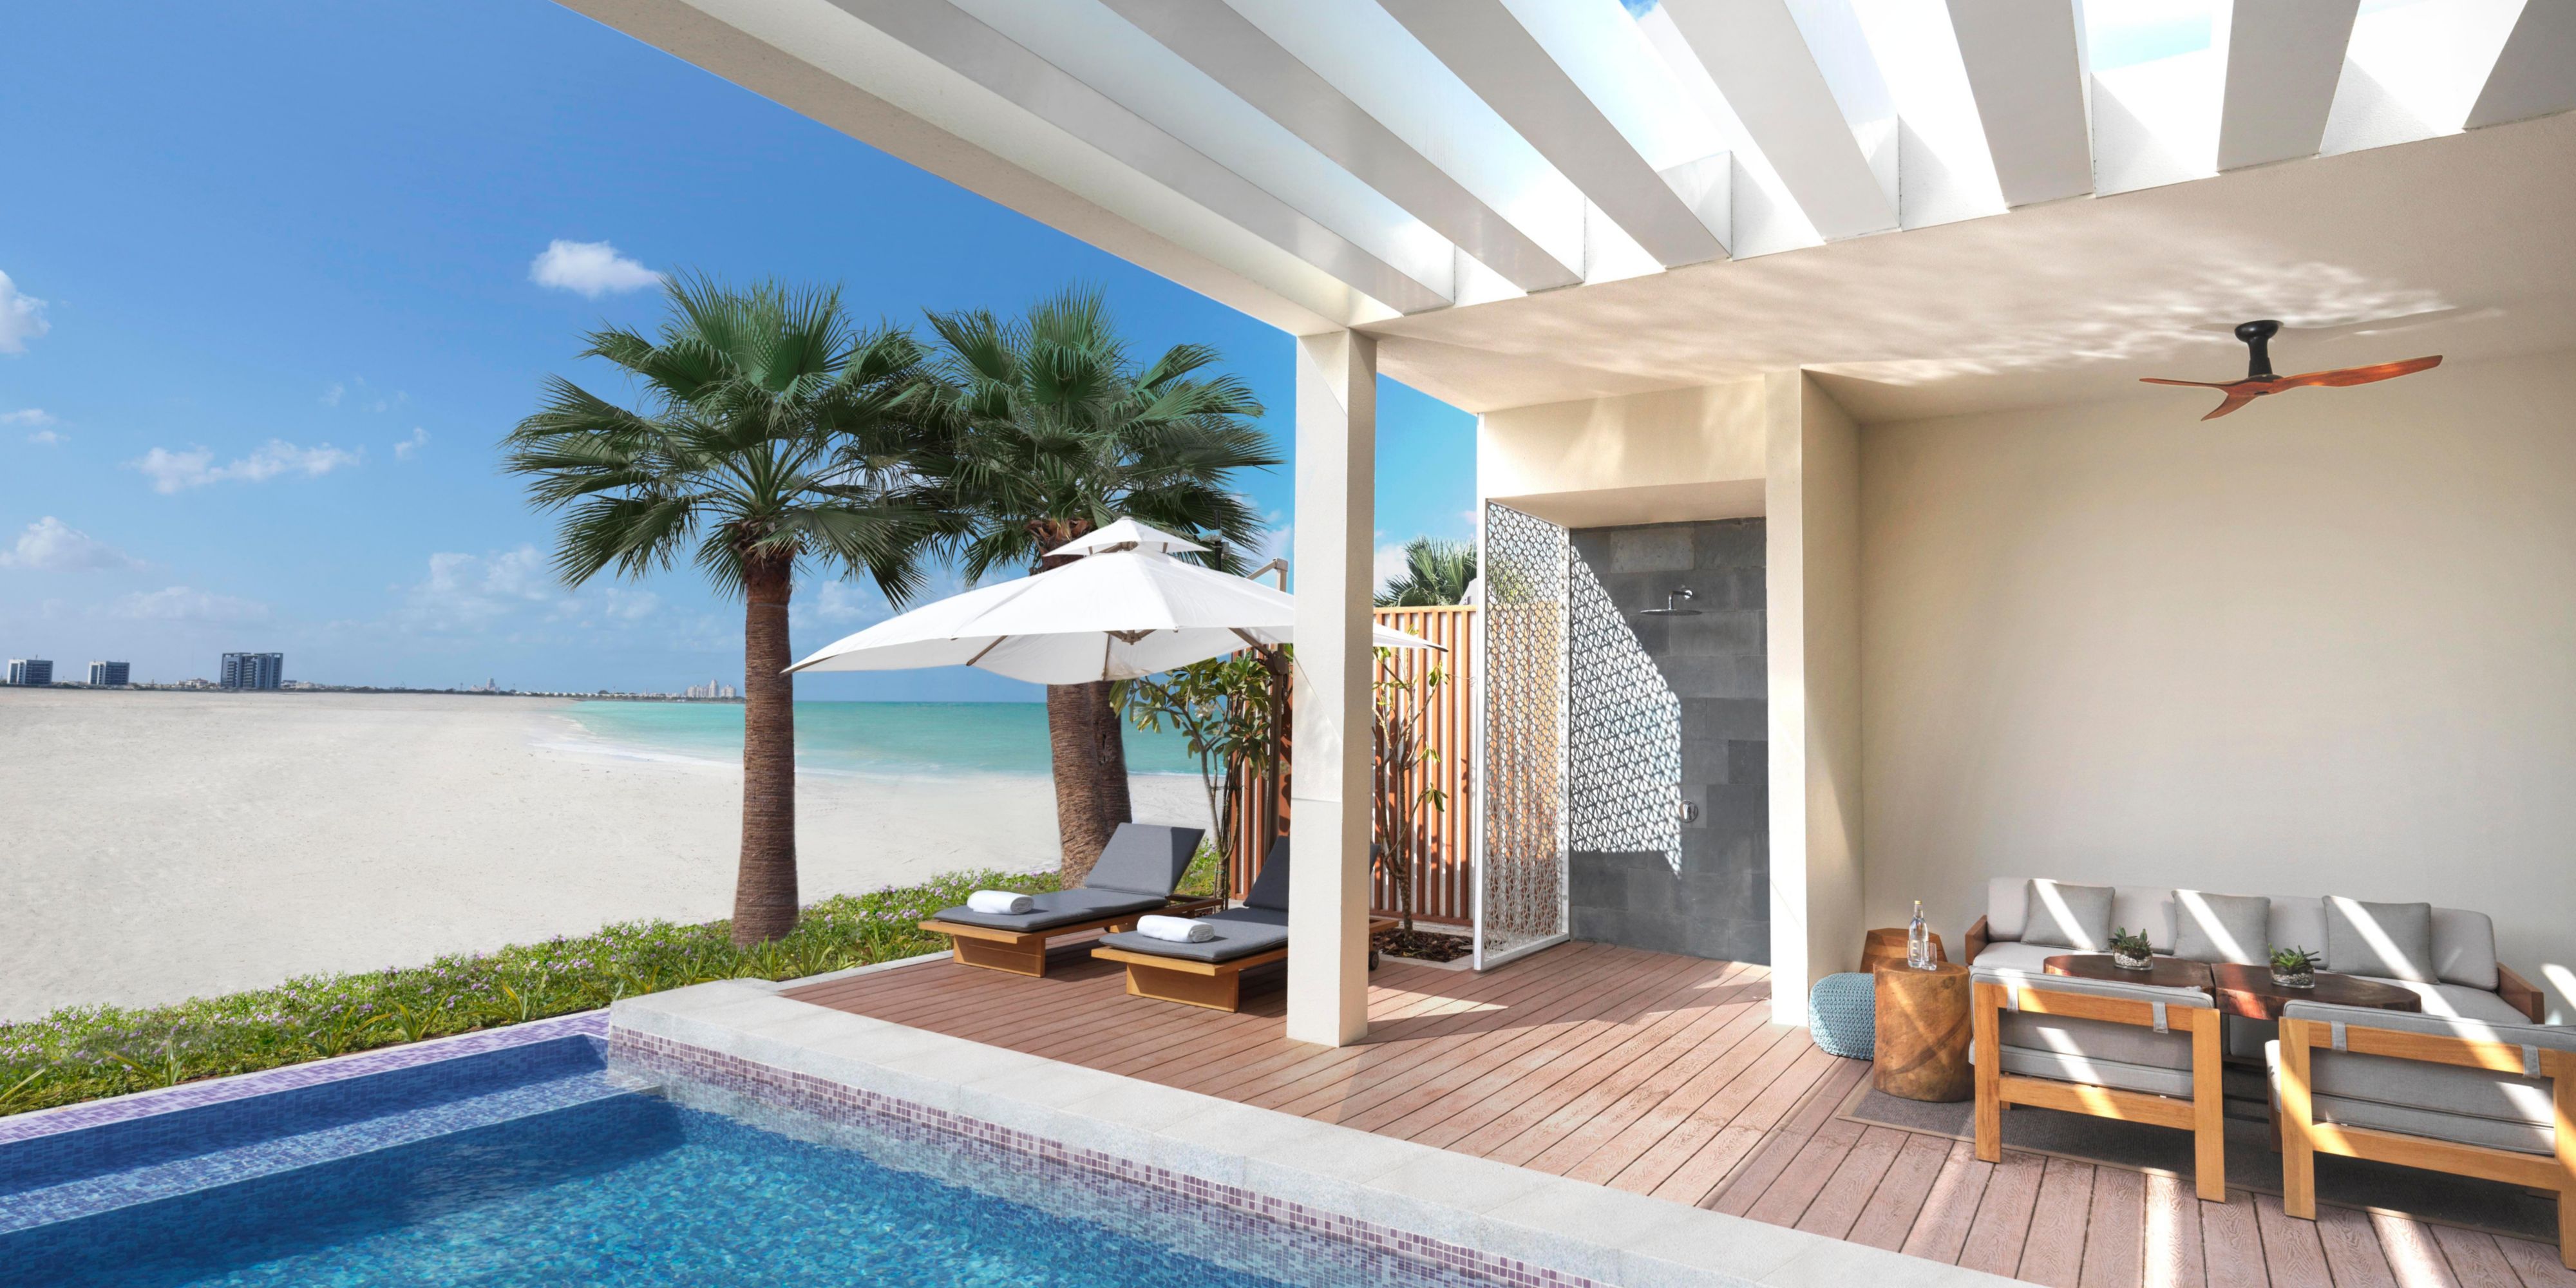 Discover enchanting beachfront private pool villas and seafront villas amid our lush gardens, just steps from the white sandy beach. Each villa offers beautiful living spaces, in-villa dining, and sophisticated amenities with ample room for family and friends.